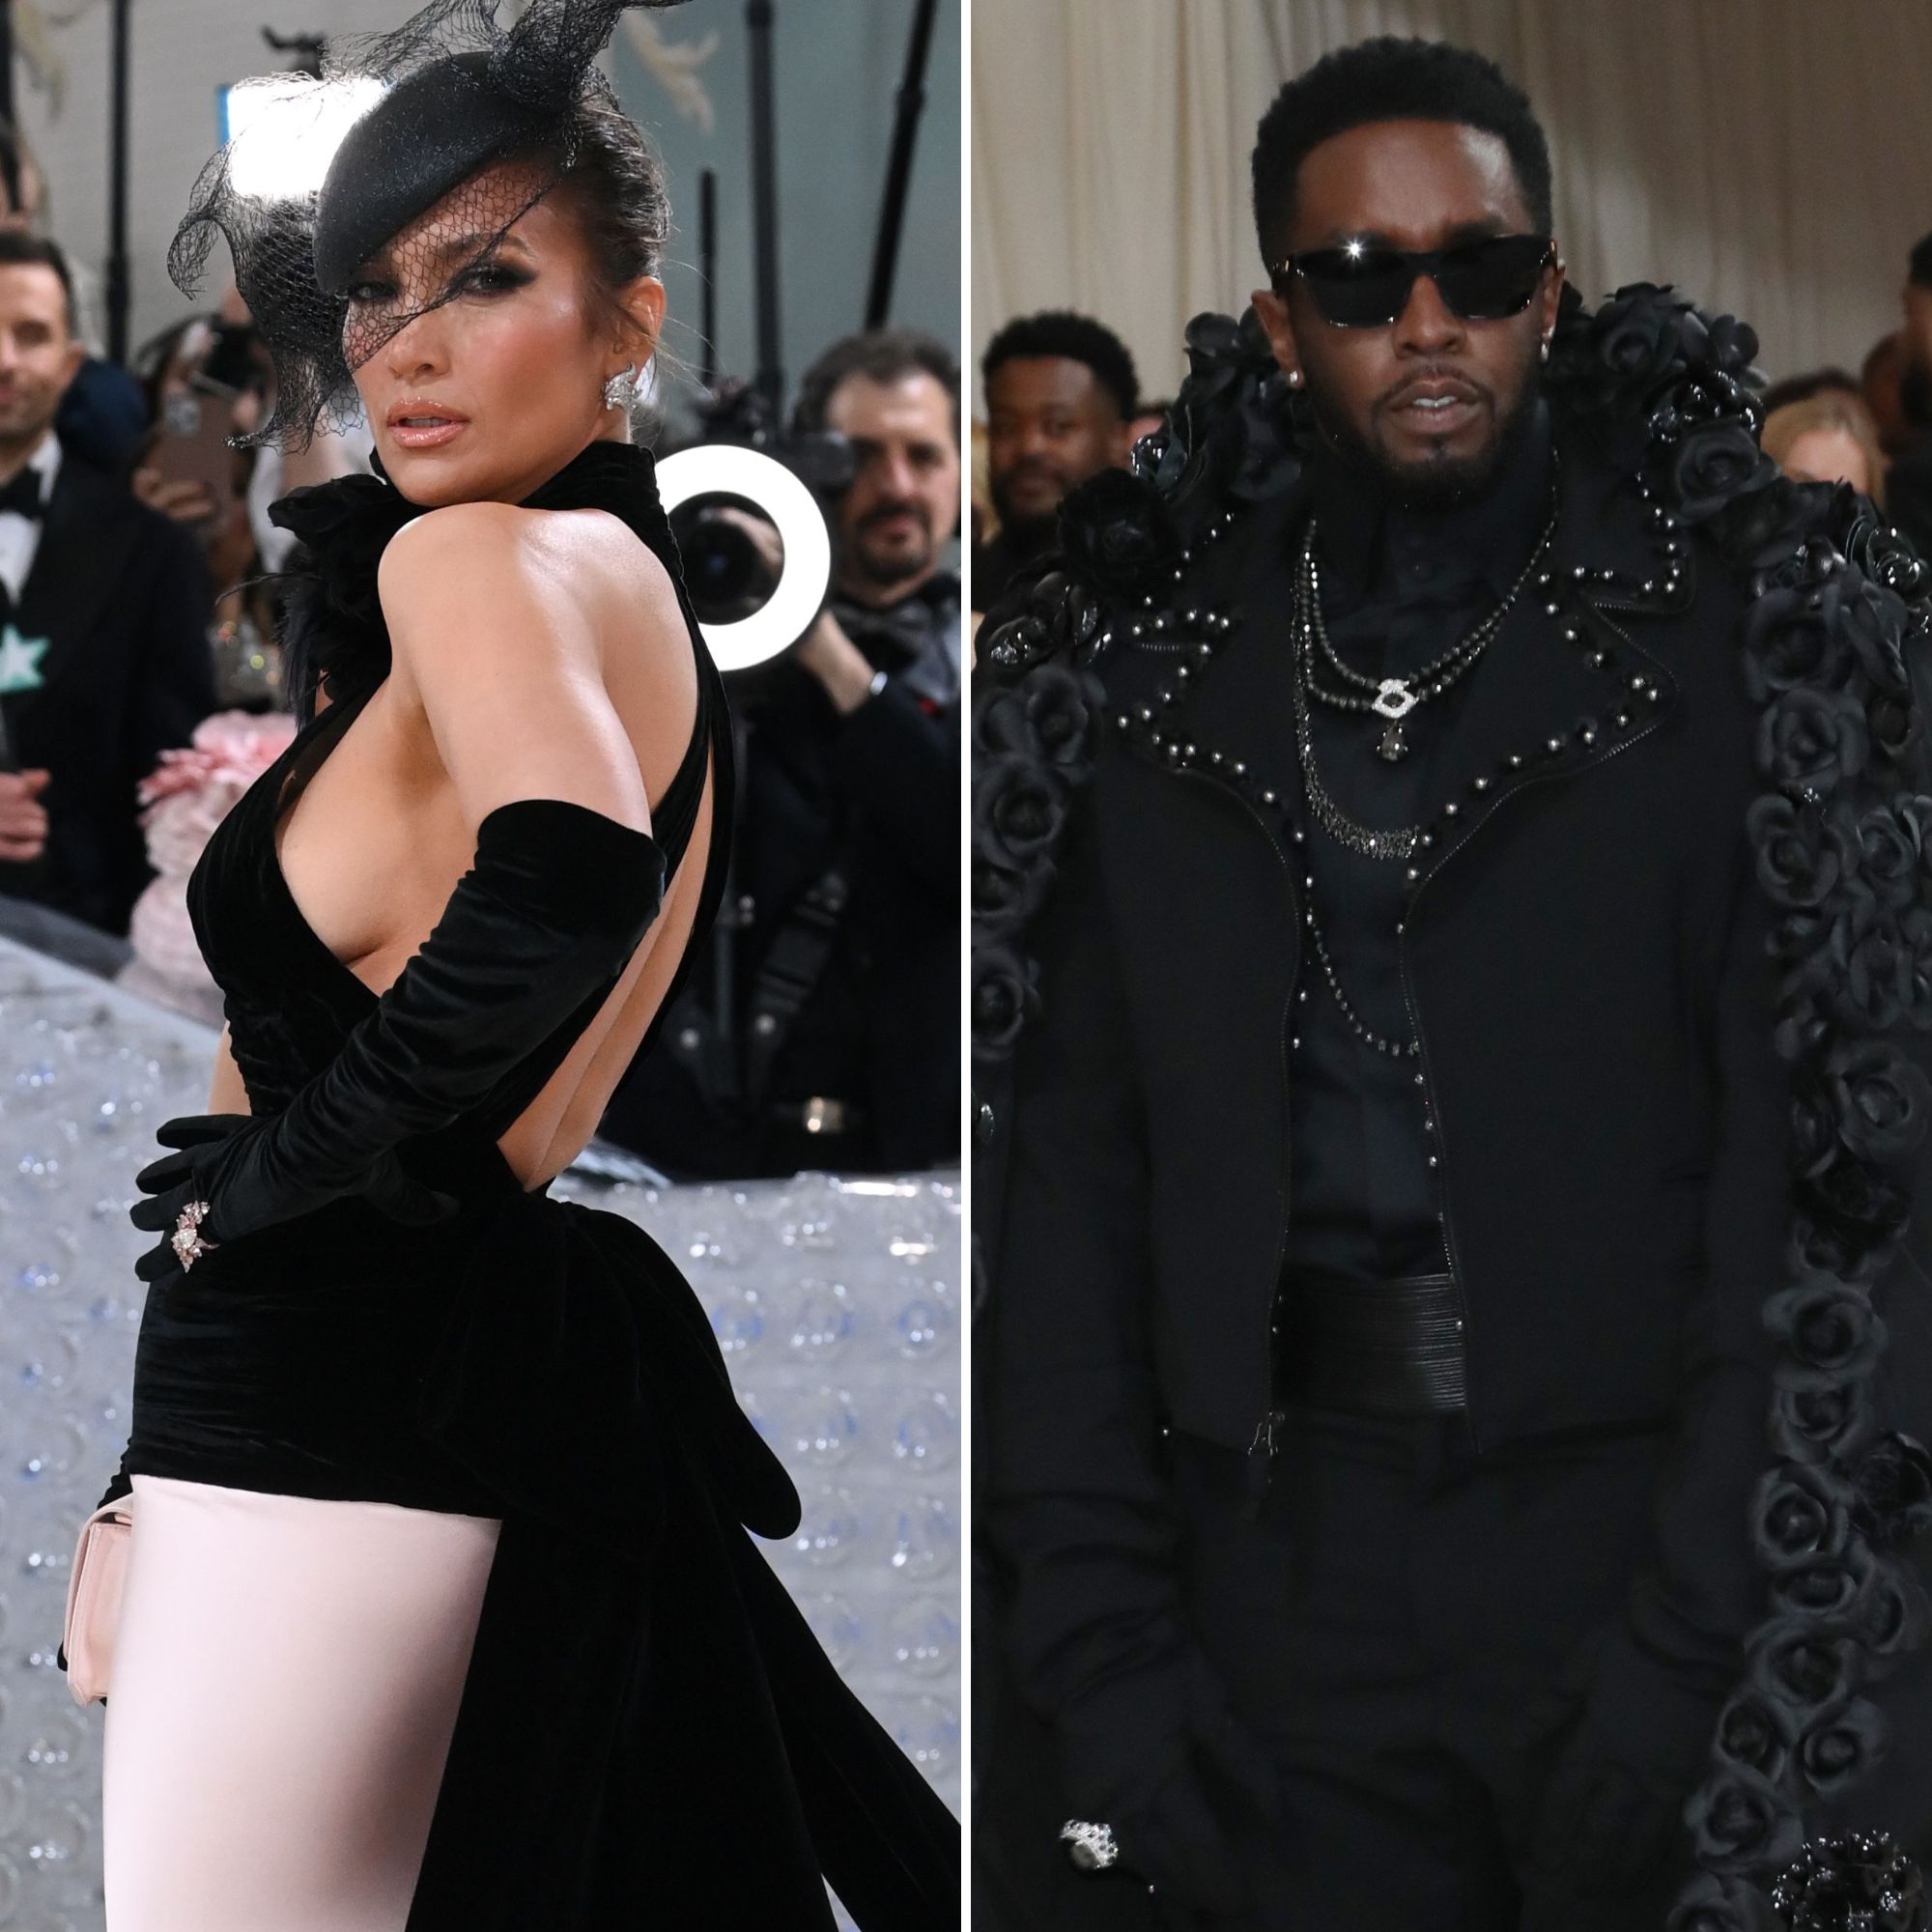 Met Gala 2023: Celebrity Exes Who May Have Interacted